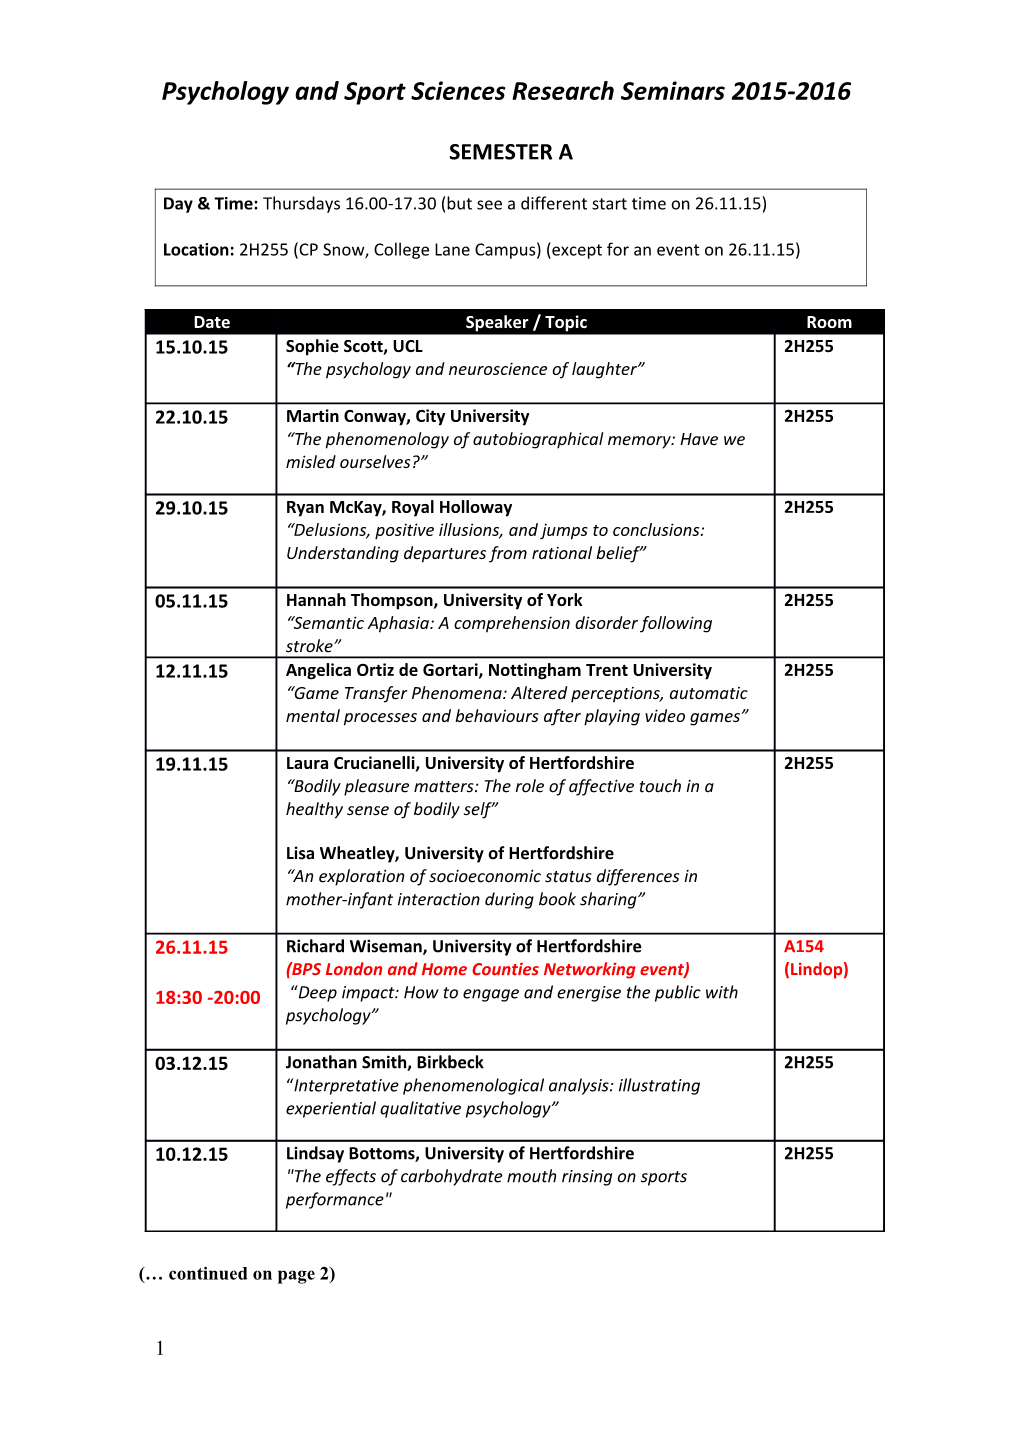 Psychology and Sport Sciences Research Seminars 2015-2016